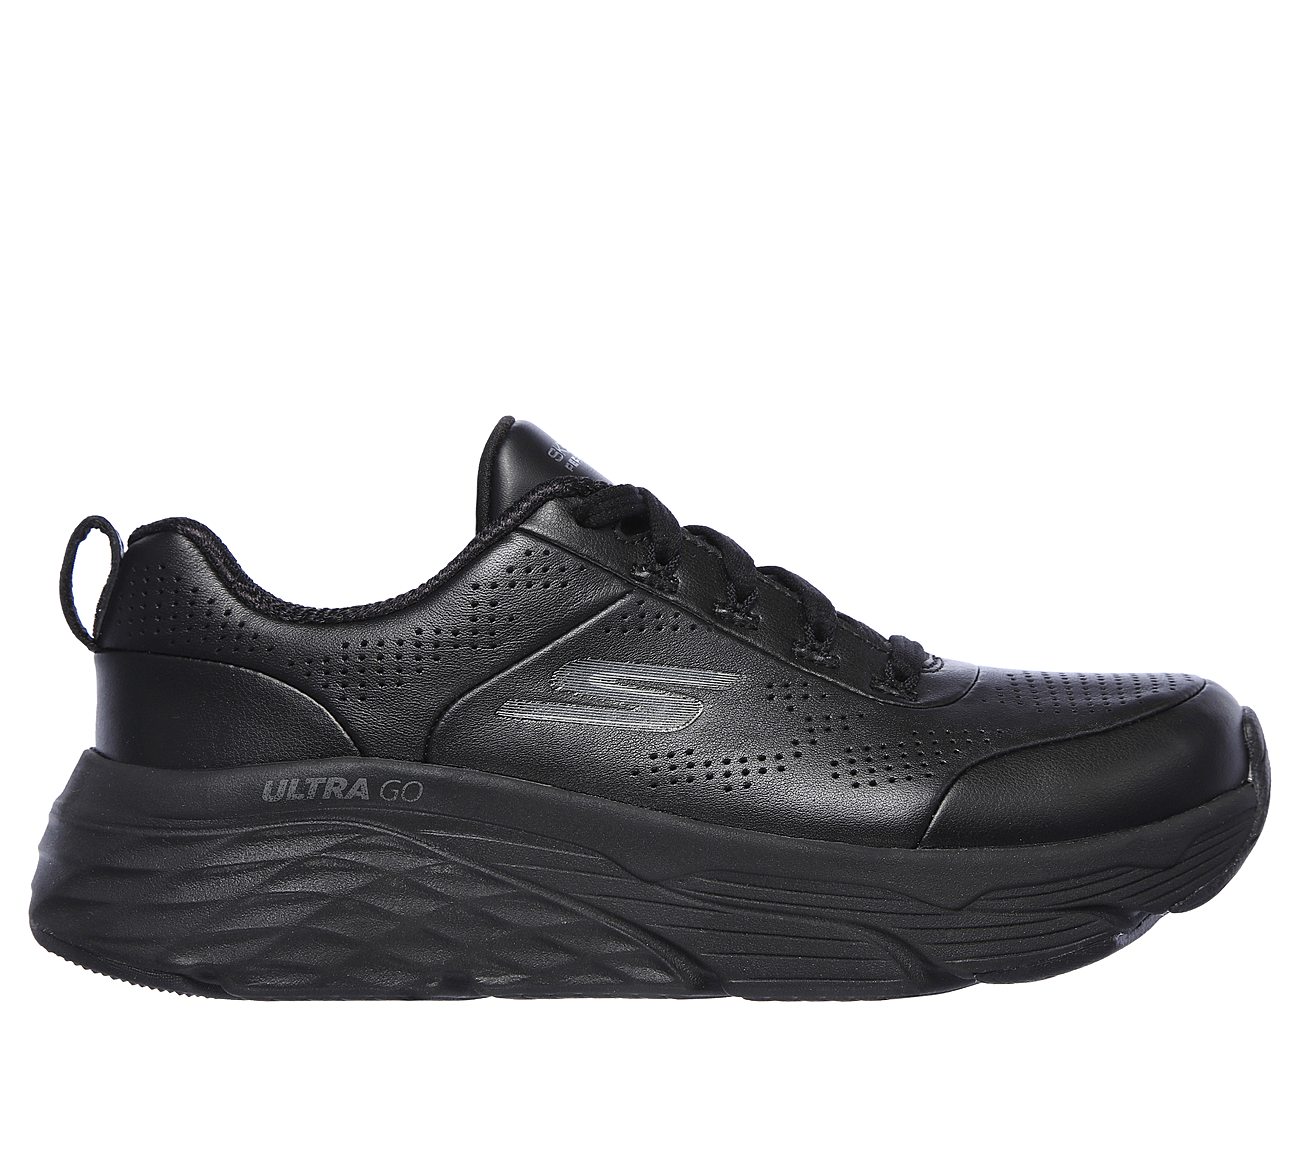 most cushioned skechers